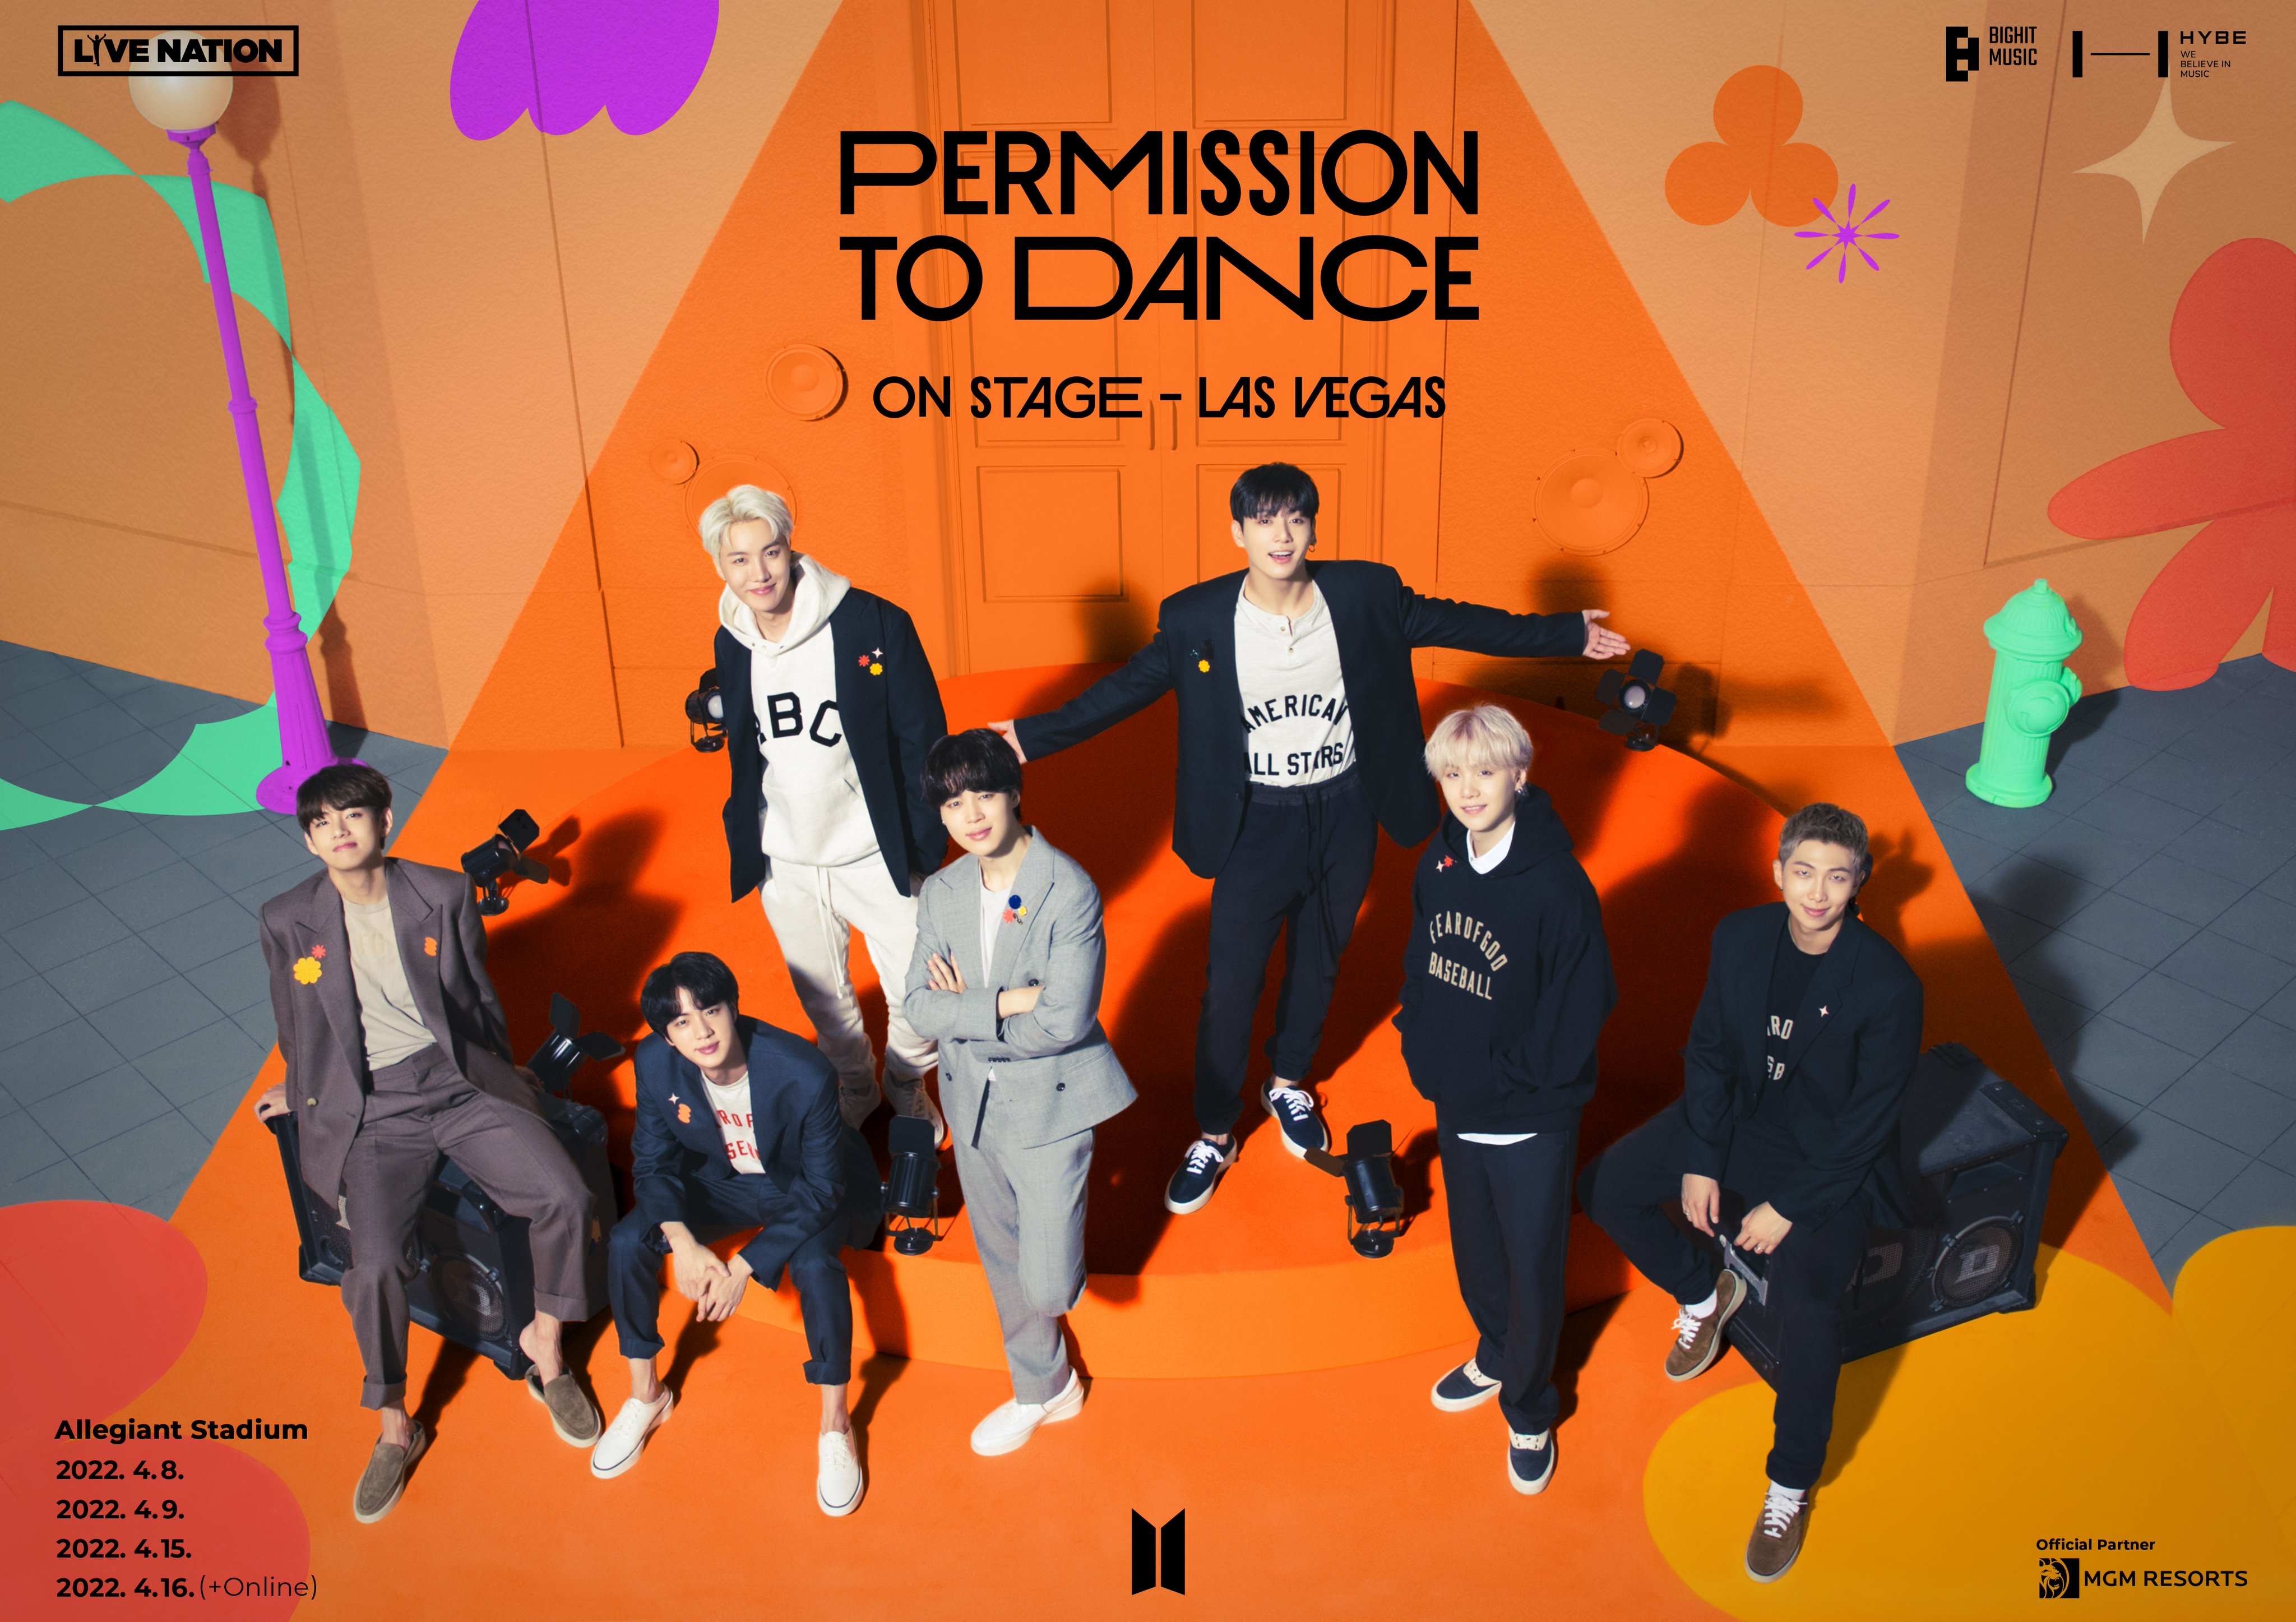 V, Jin, J-Hope, Jimin, Jungkook, Suga, and RM pose for a promotional photo for 'Permission to Dance On Stage - Las Vegas'